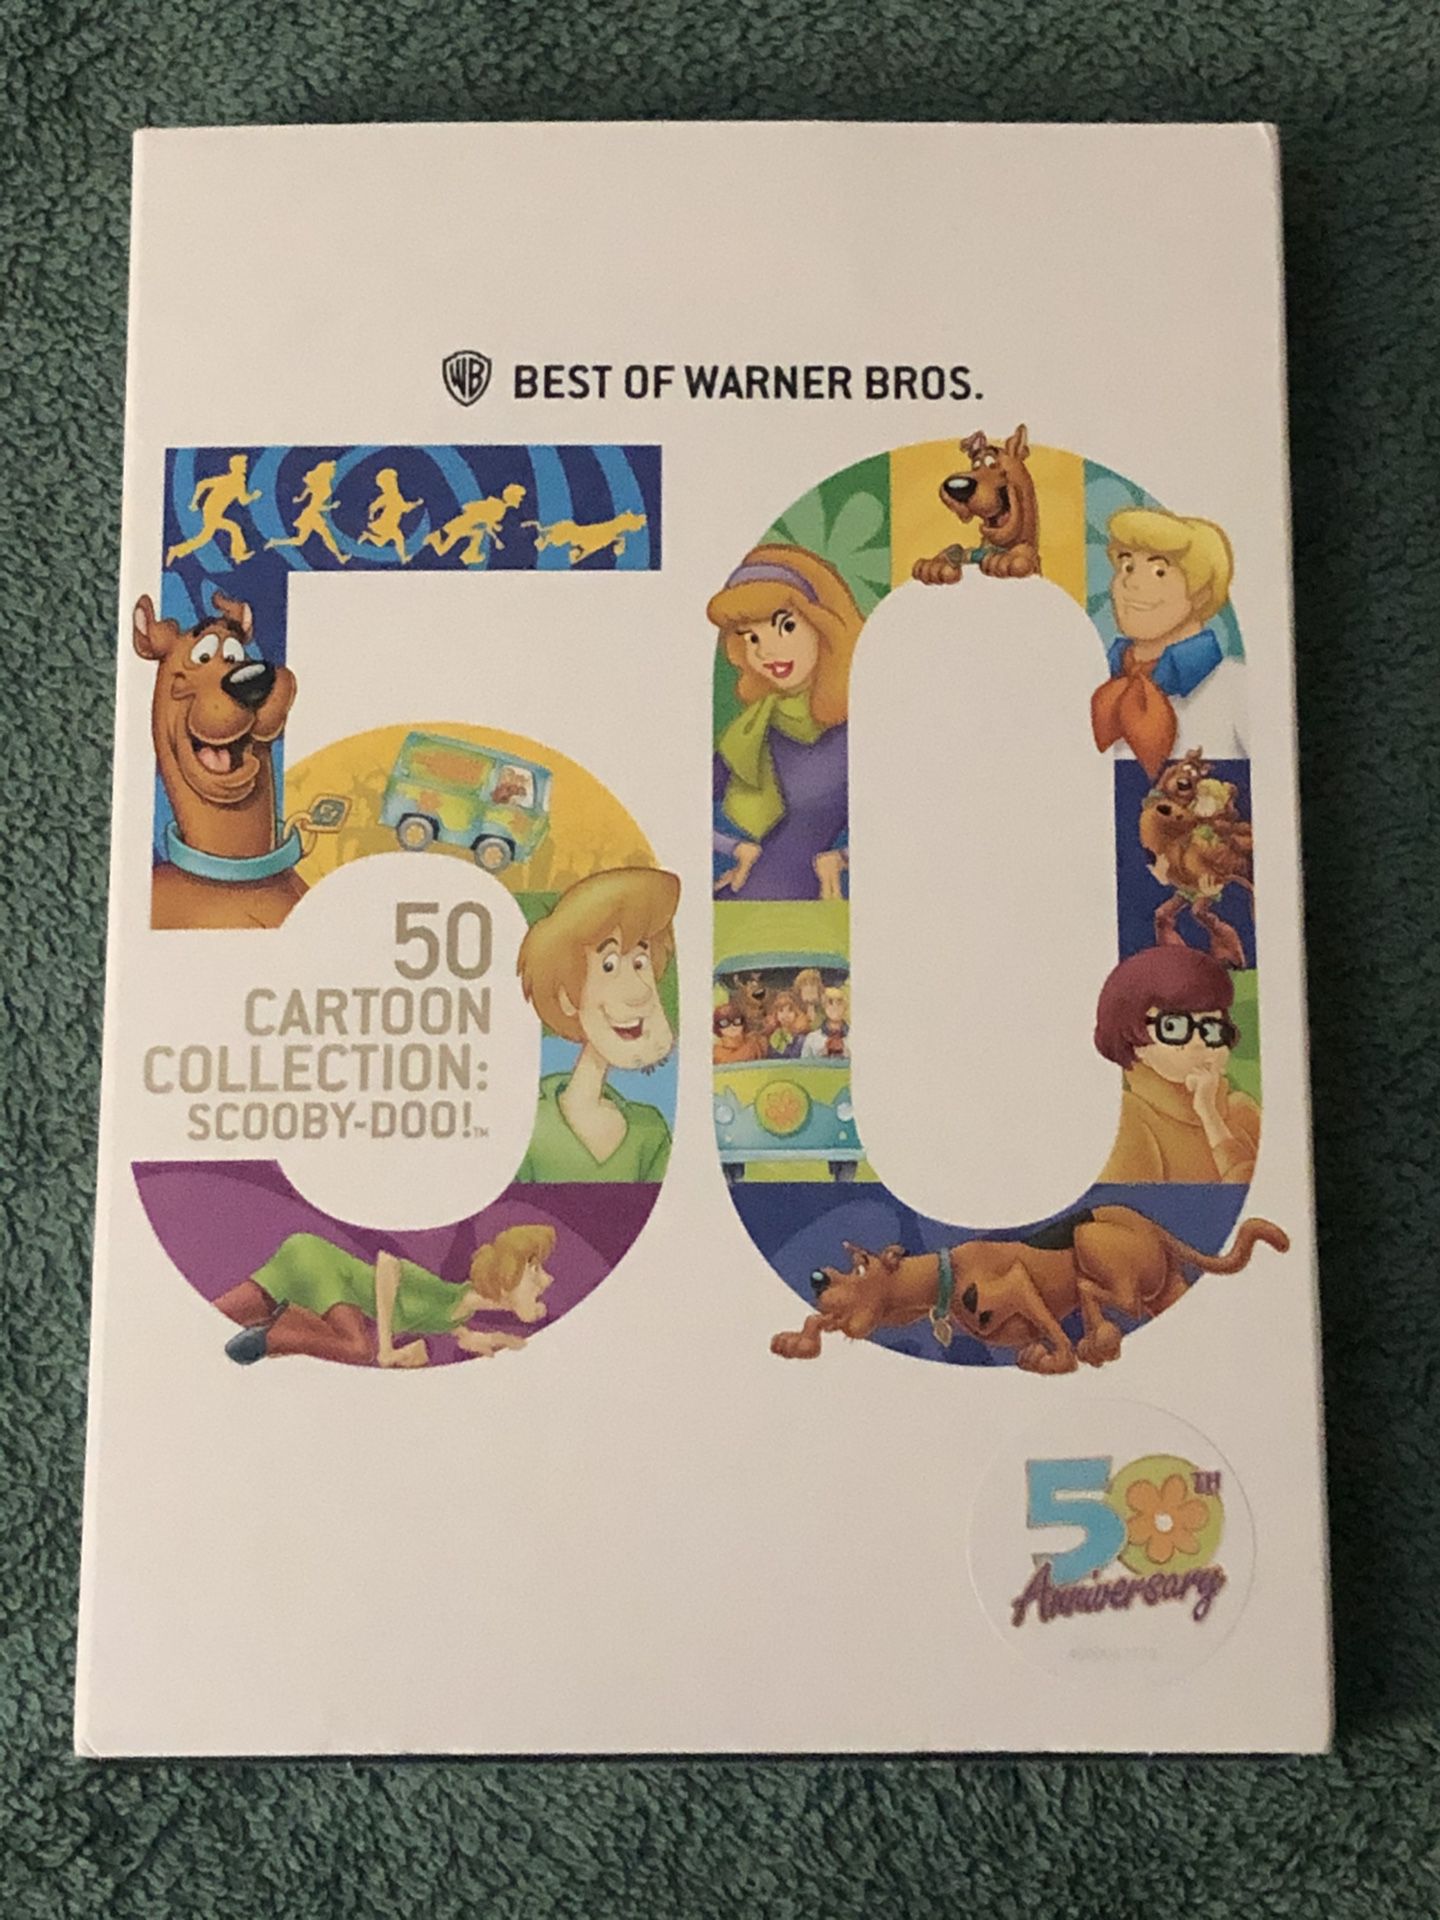 50TH ANNIVERSARY BEST OF WARNER BROS. 50 CARTOON COLLECTION SCOOBY-DOO SEALED